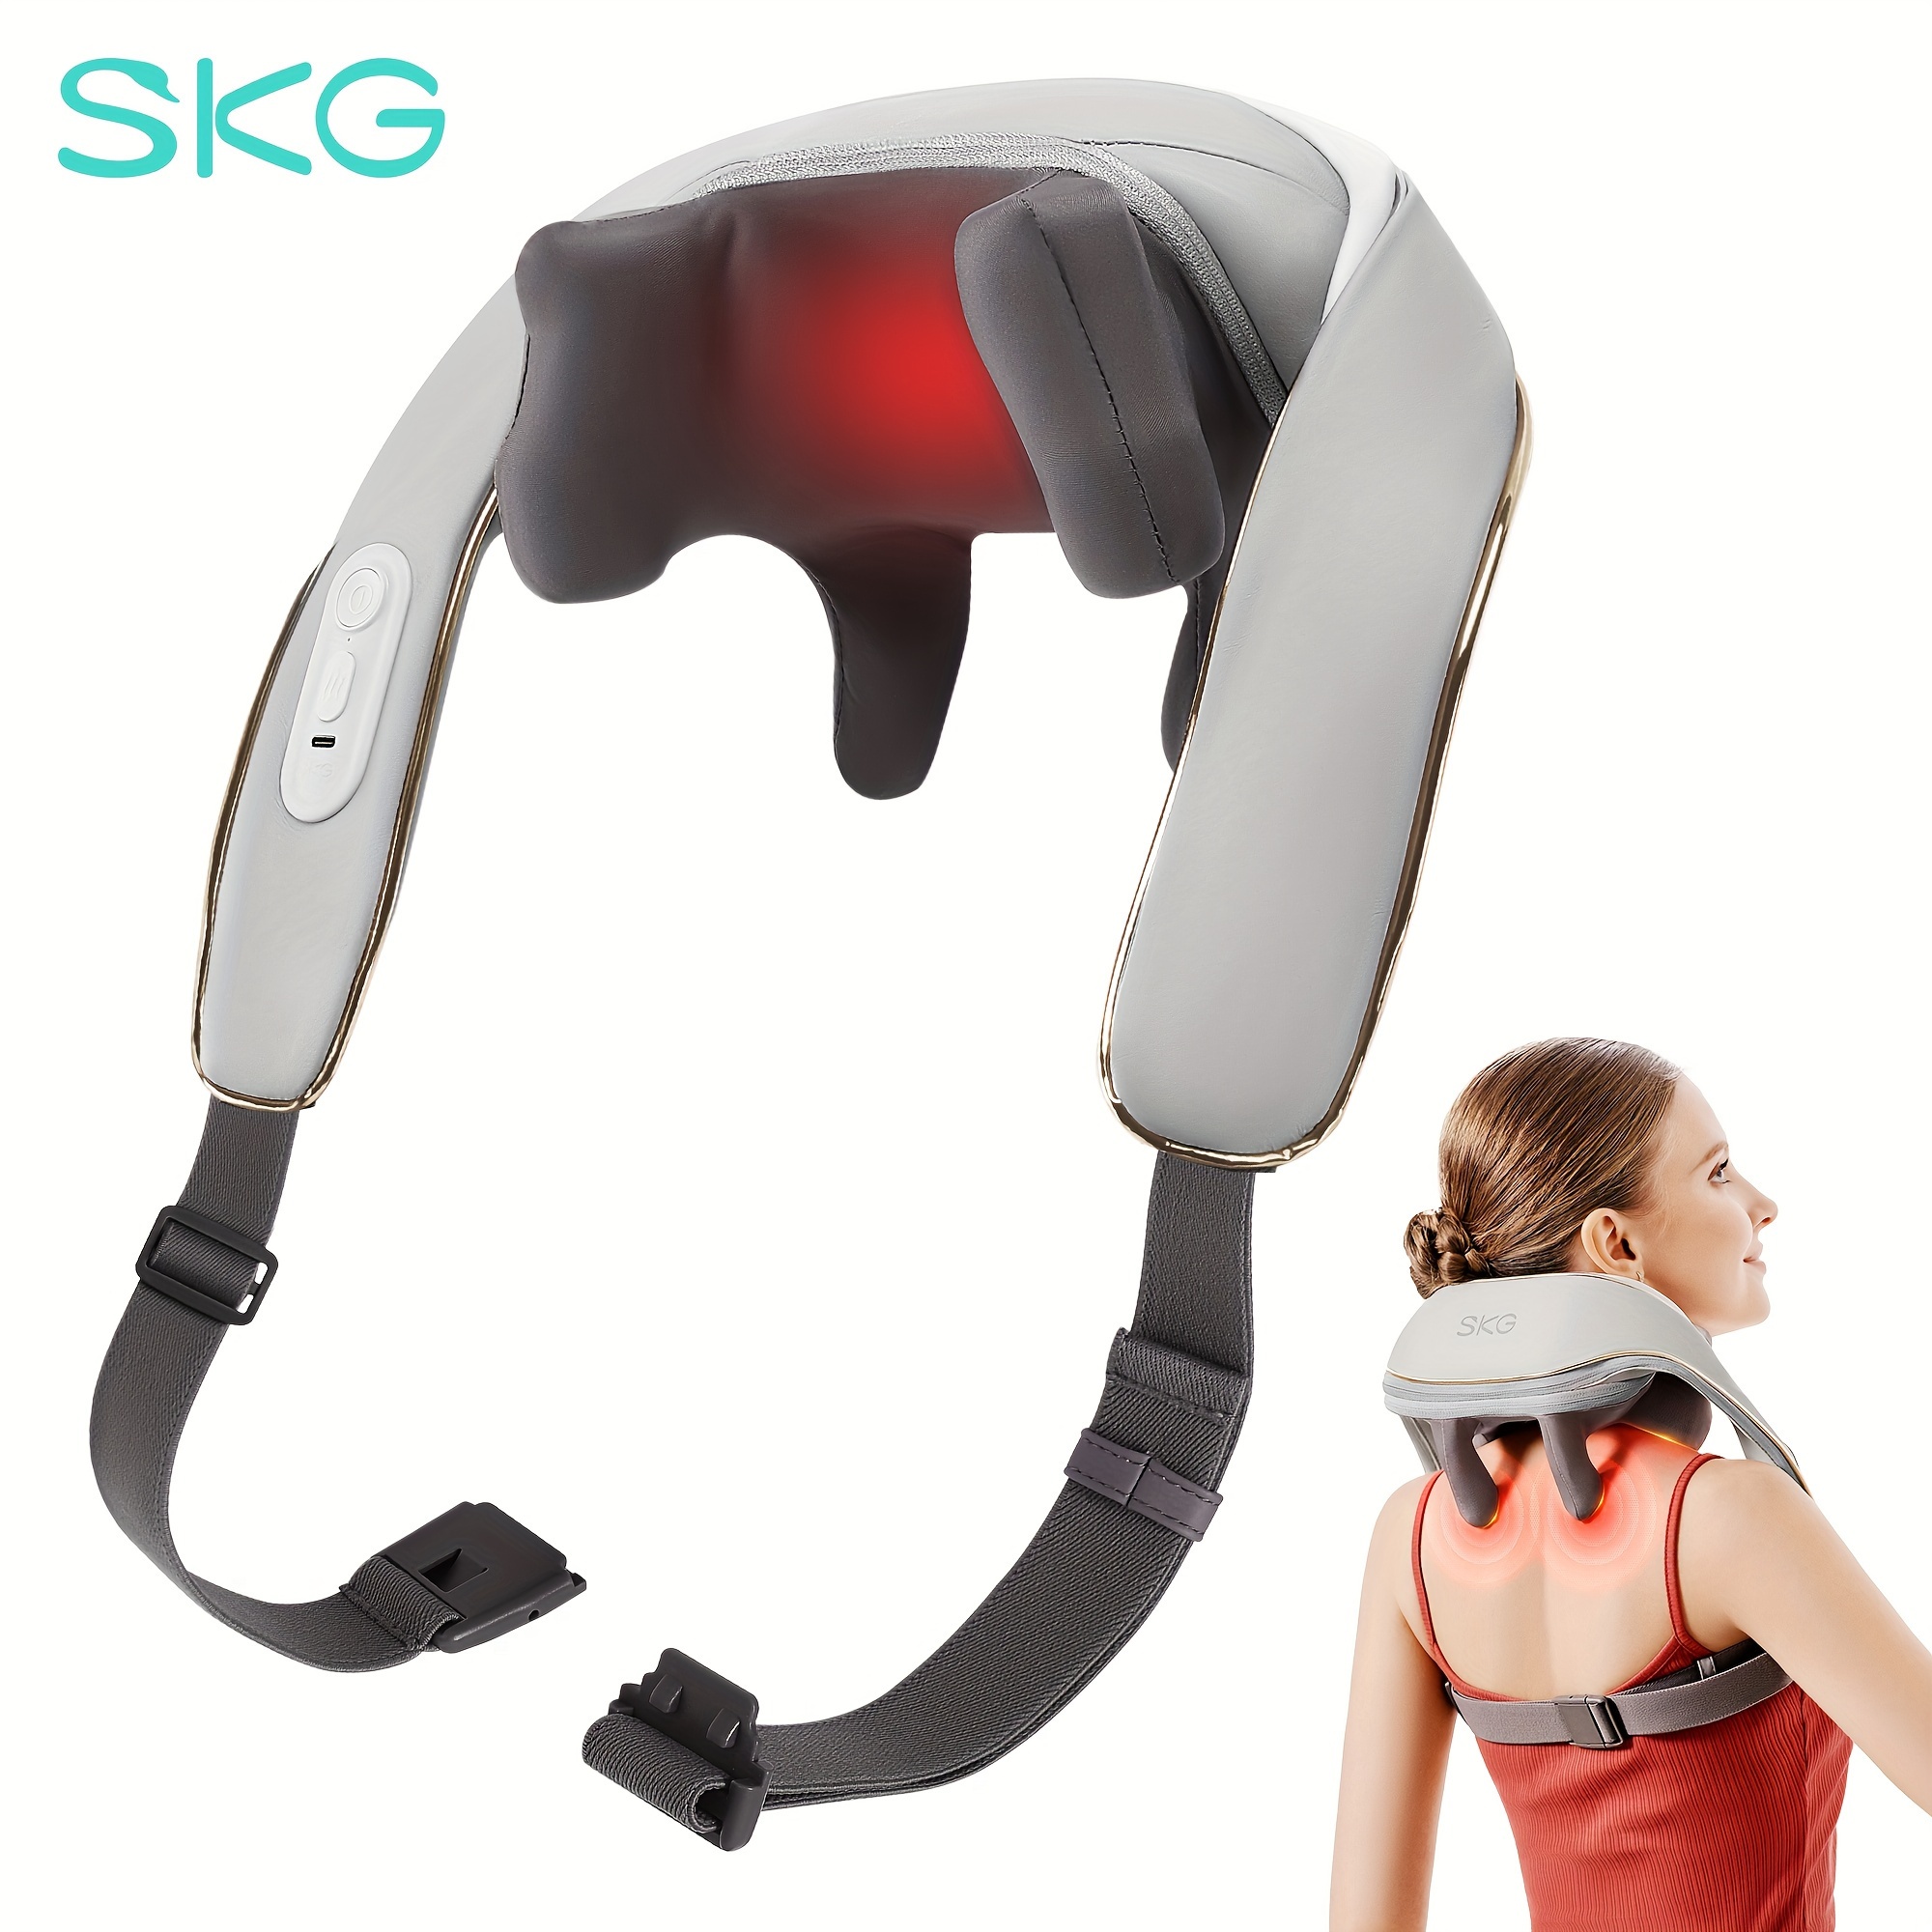 

Skg H5 Mini Neck Massager For Deep Tissue, 6d Cordless Shiatsu Neck And Shoulder Massager With Heat For Neck Back Shoulder Legs Electric Kneading Massage Use At Home Office Car Gifts For Men Women